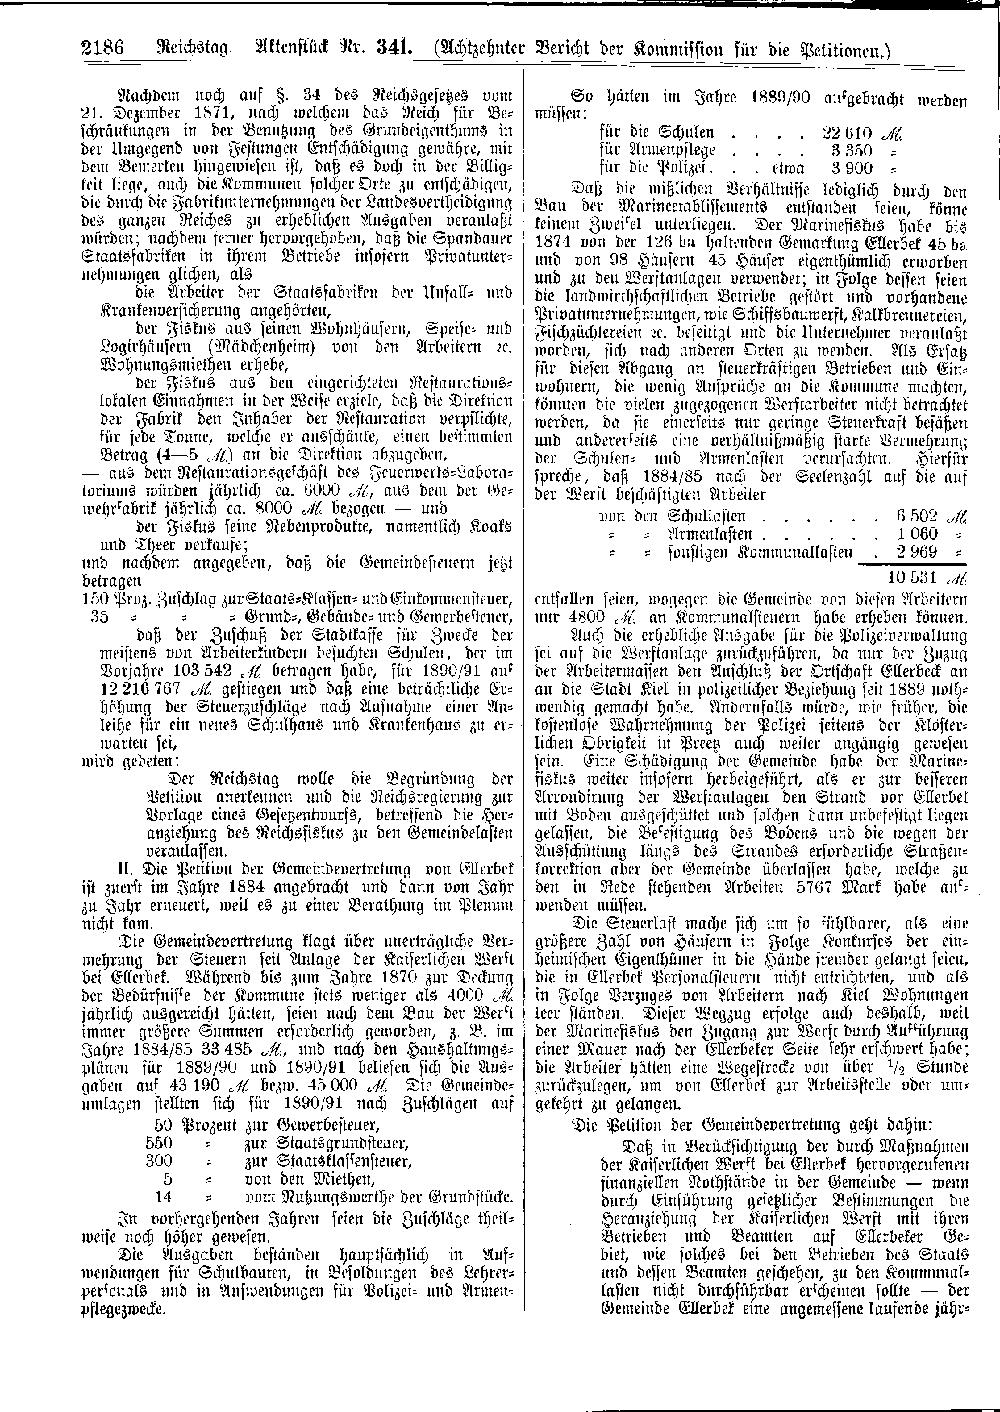 Scan of page 2186